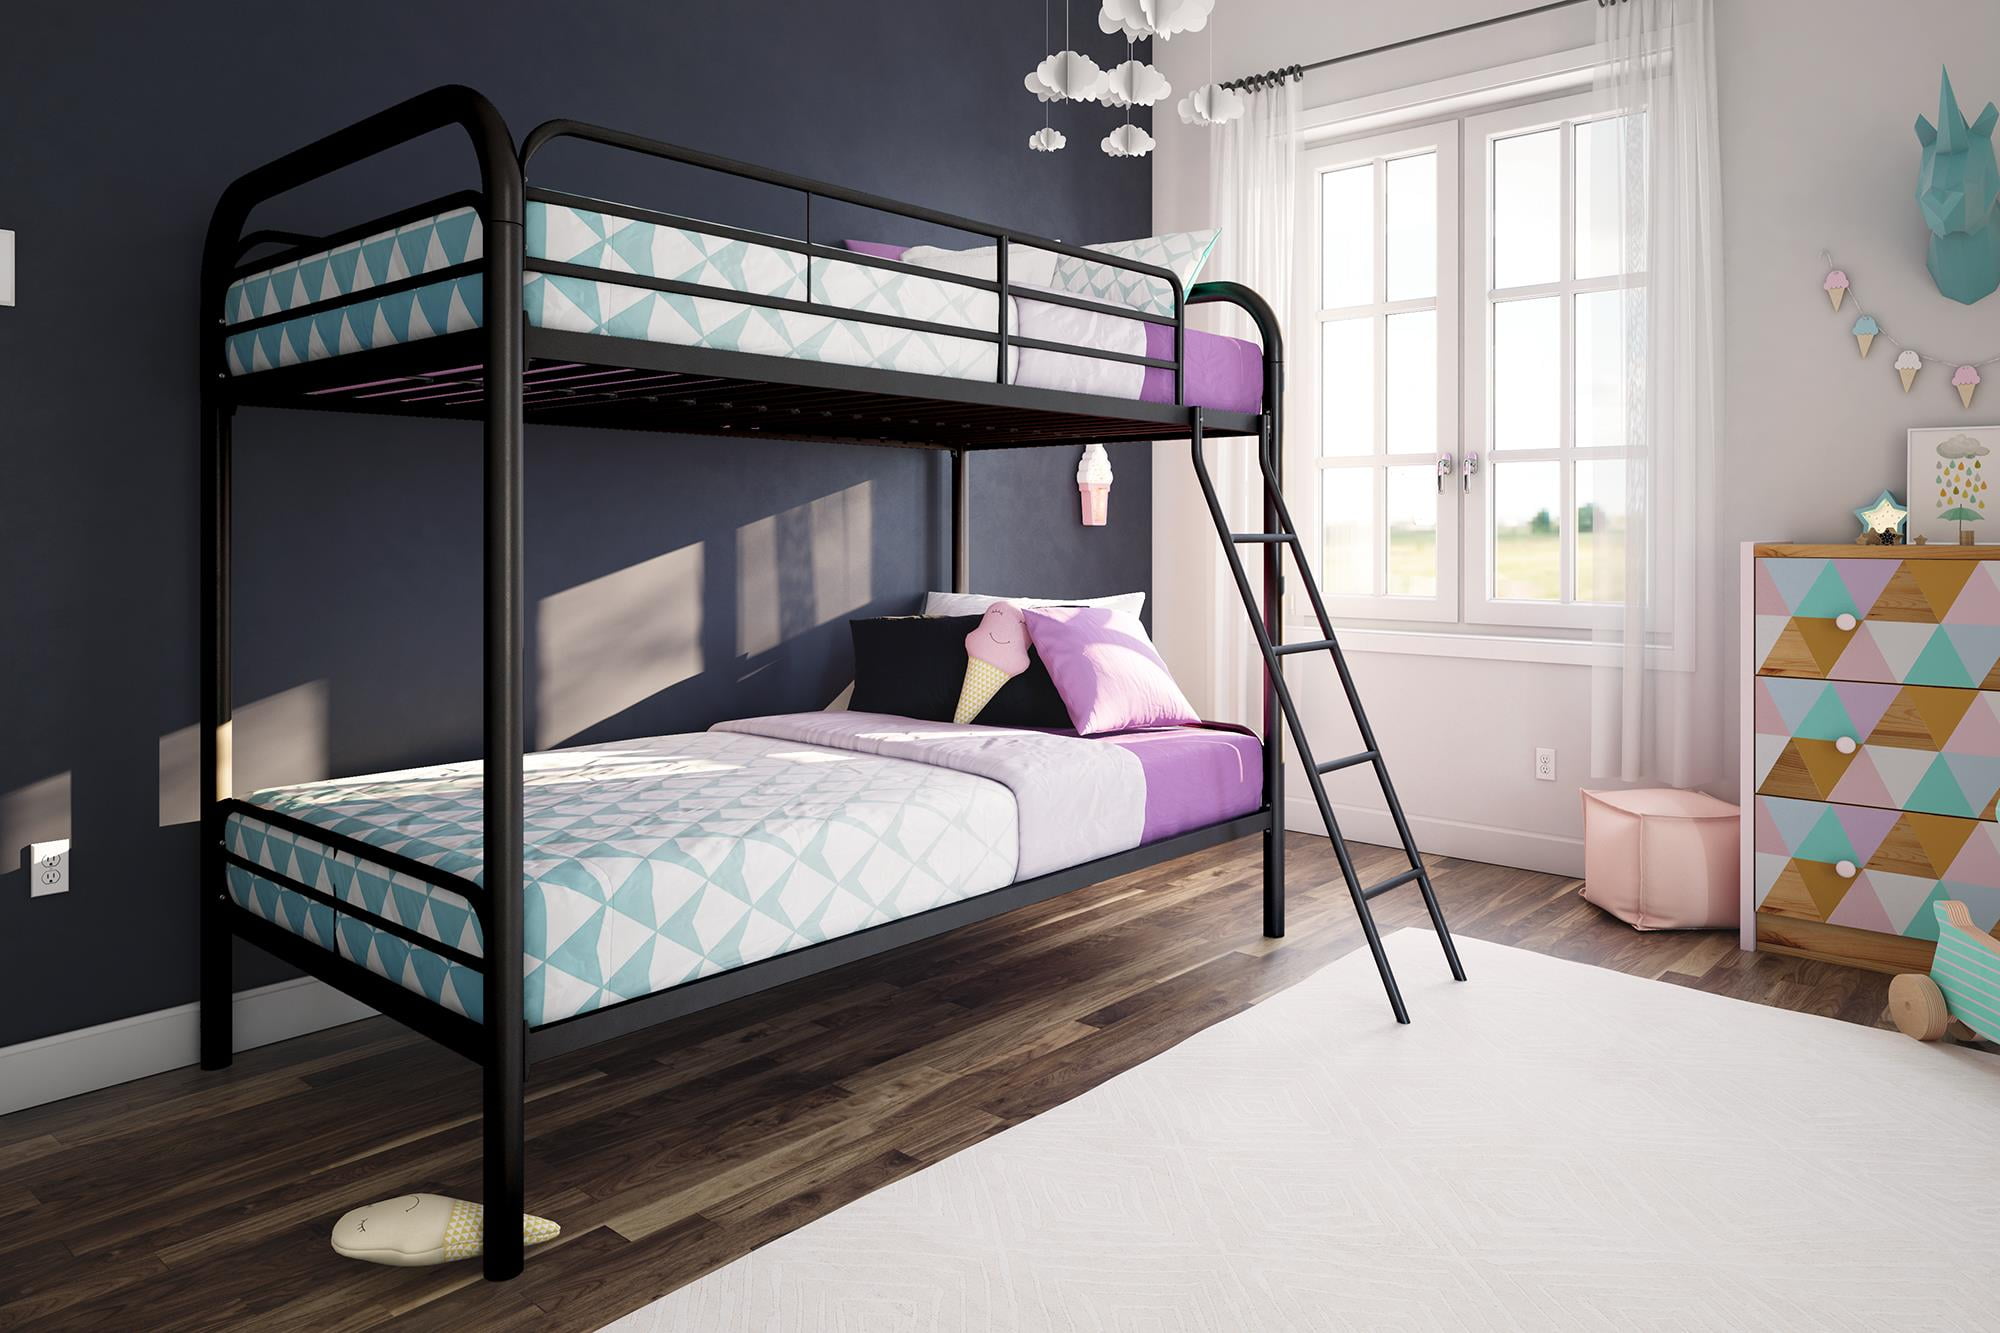 twin bunk beds with mattresses included